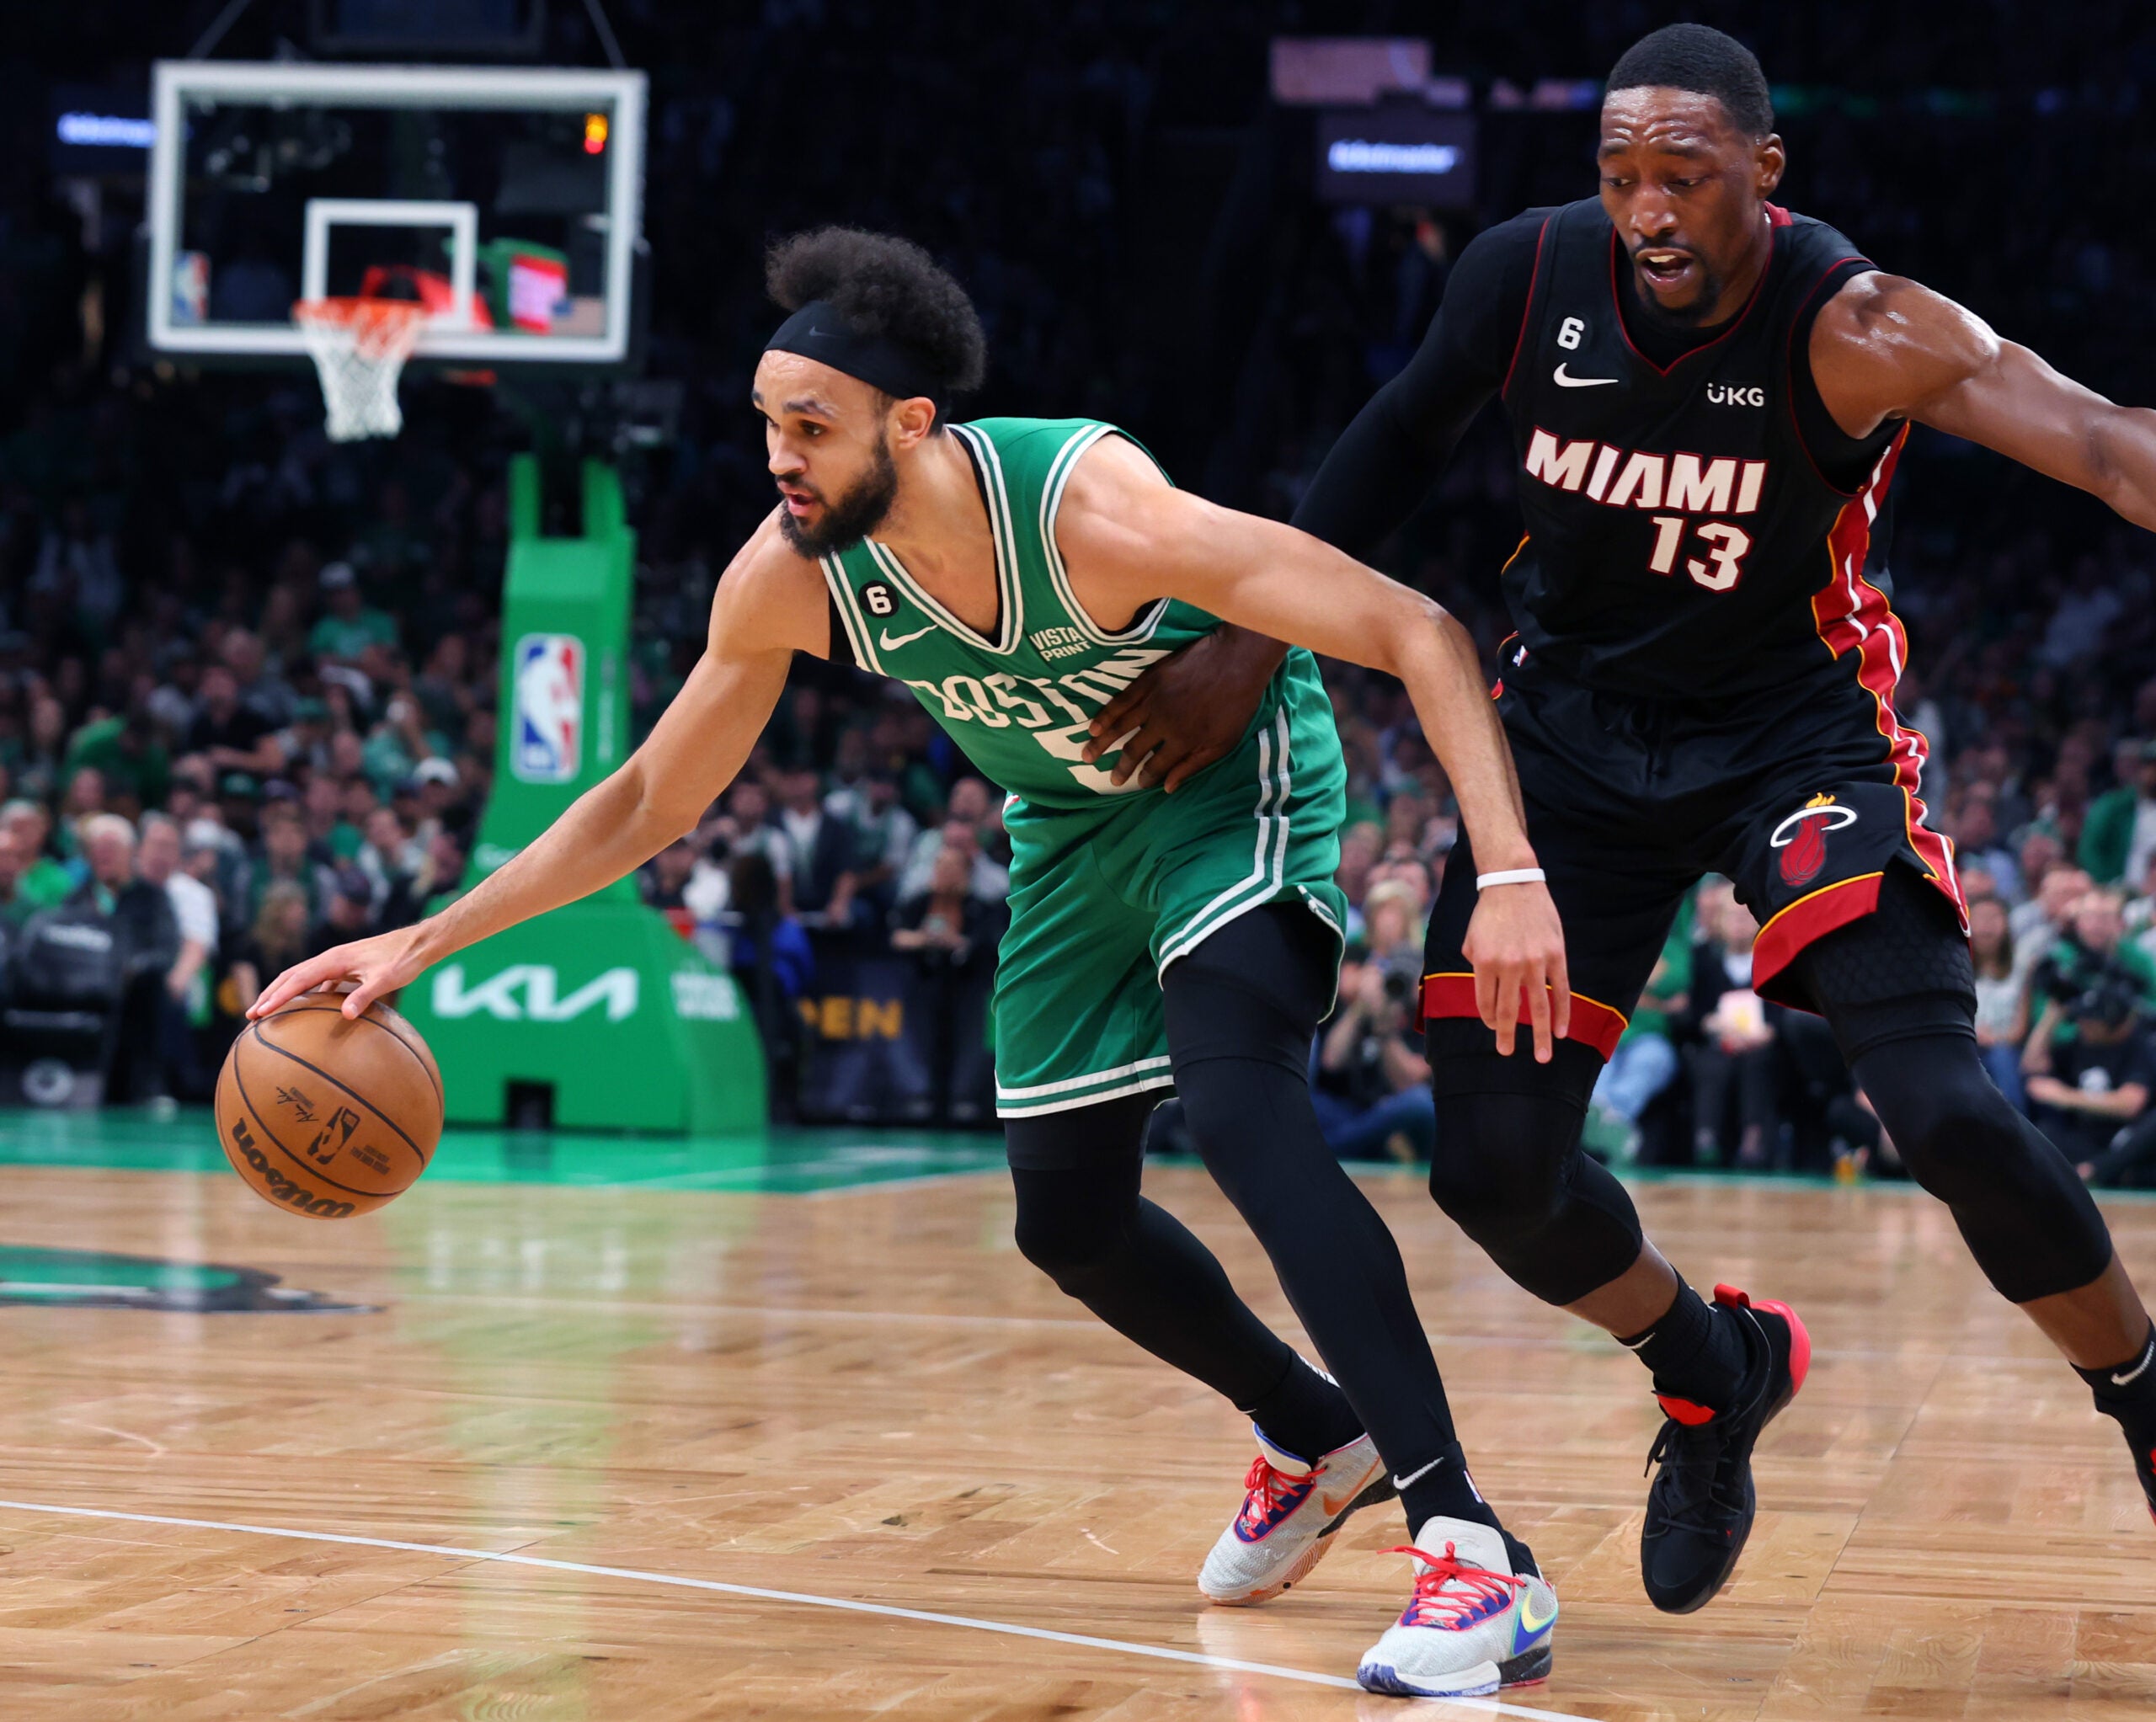 Do the Celtics have the best backcourt in the NBA? - Yahoo Sports